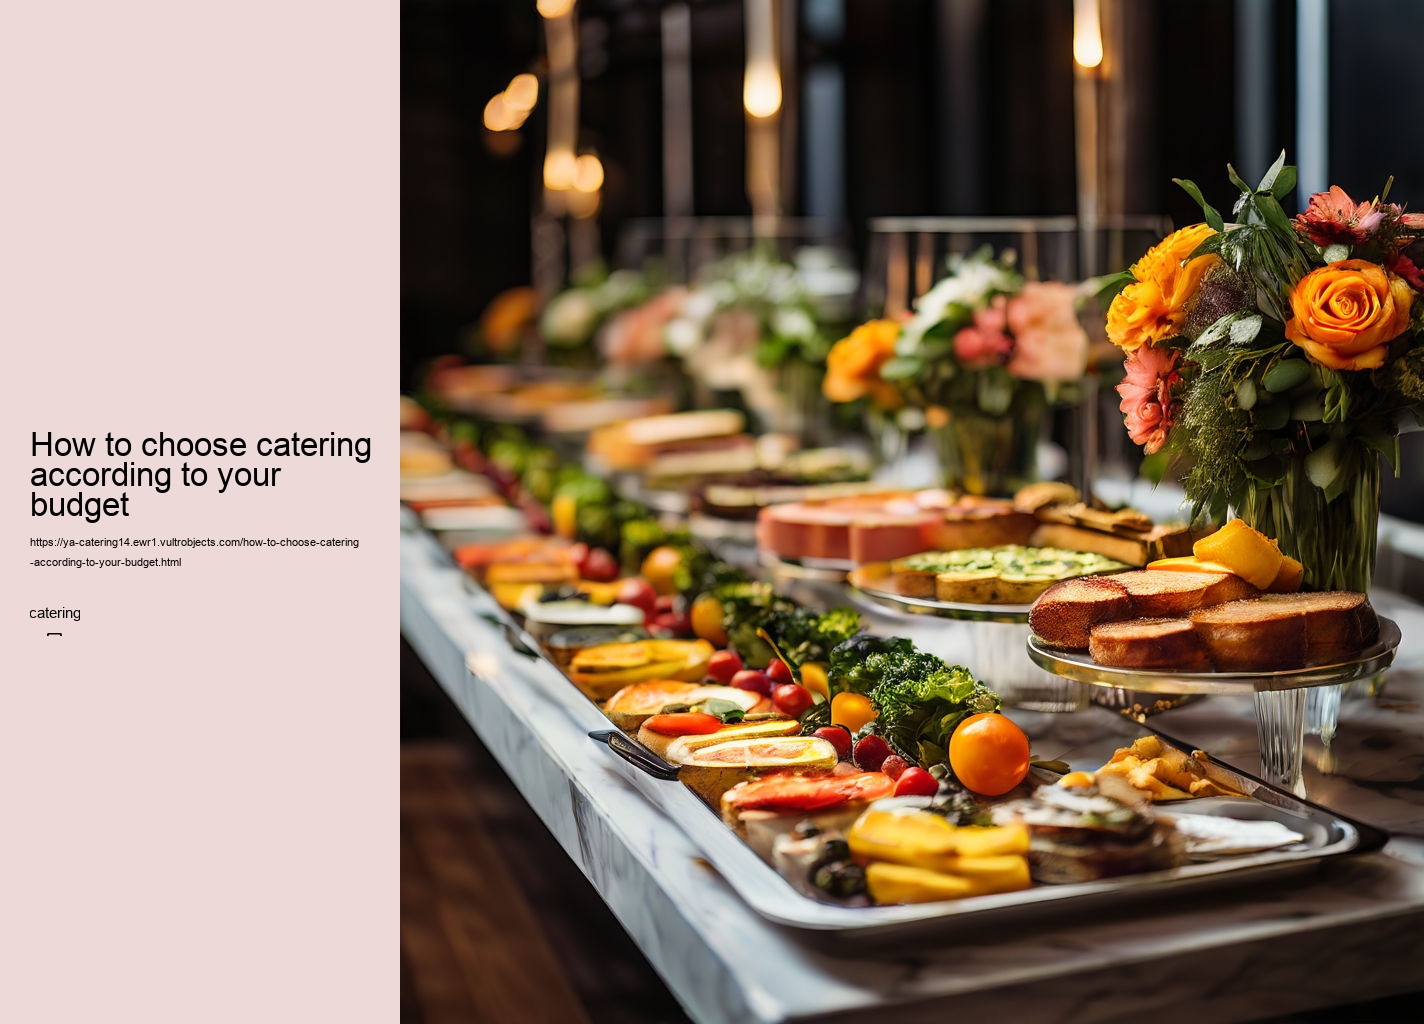 How to choose catering according to your budget